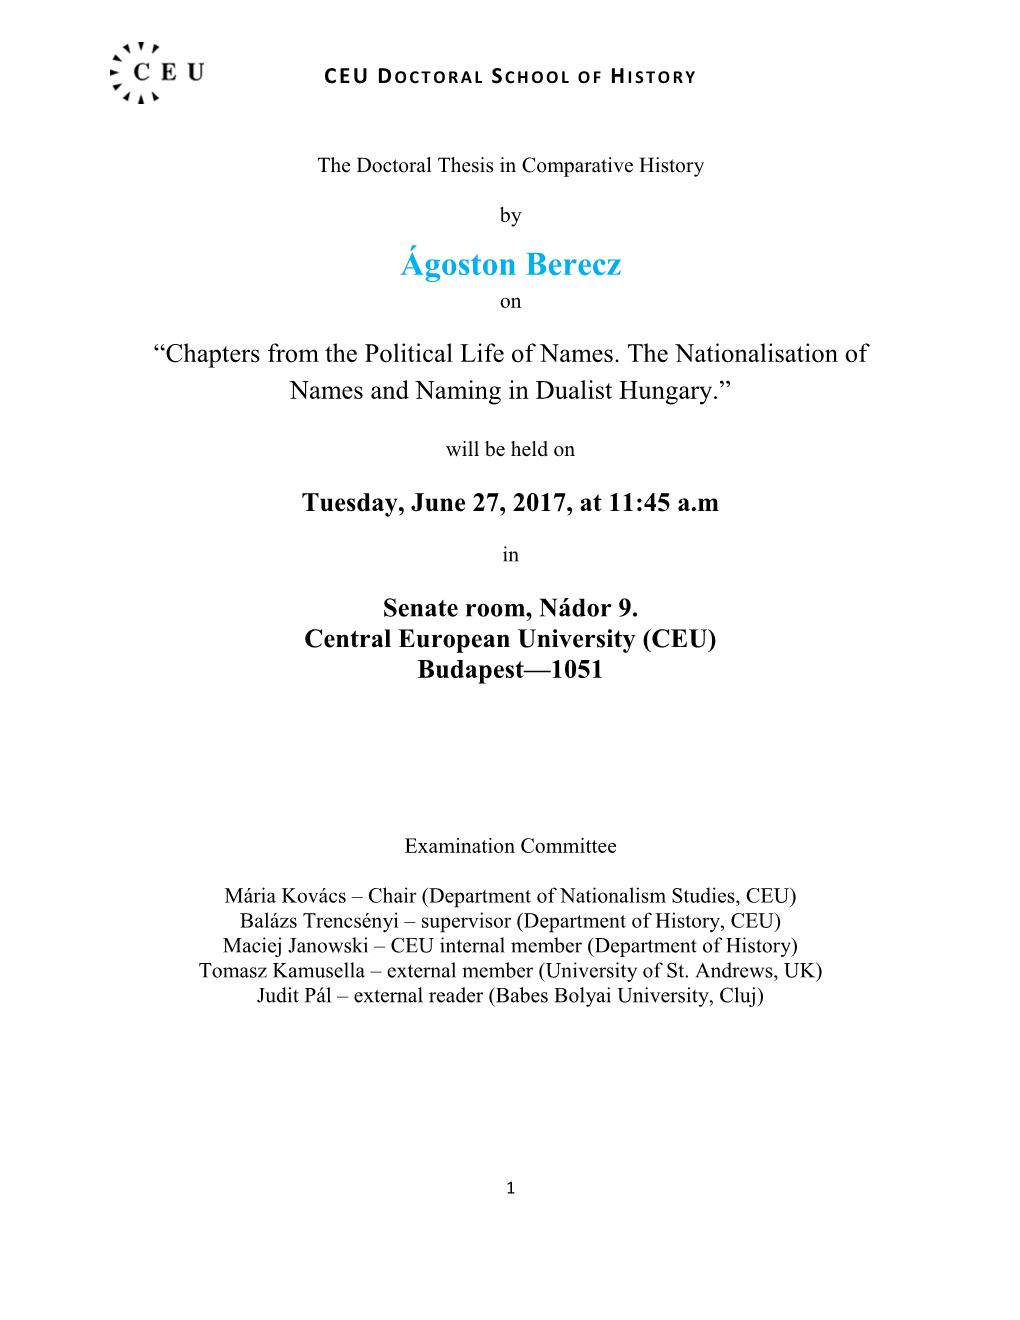 The Public Defense of the Doctoral Thesis In